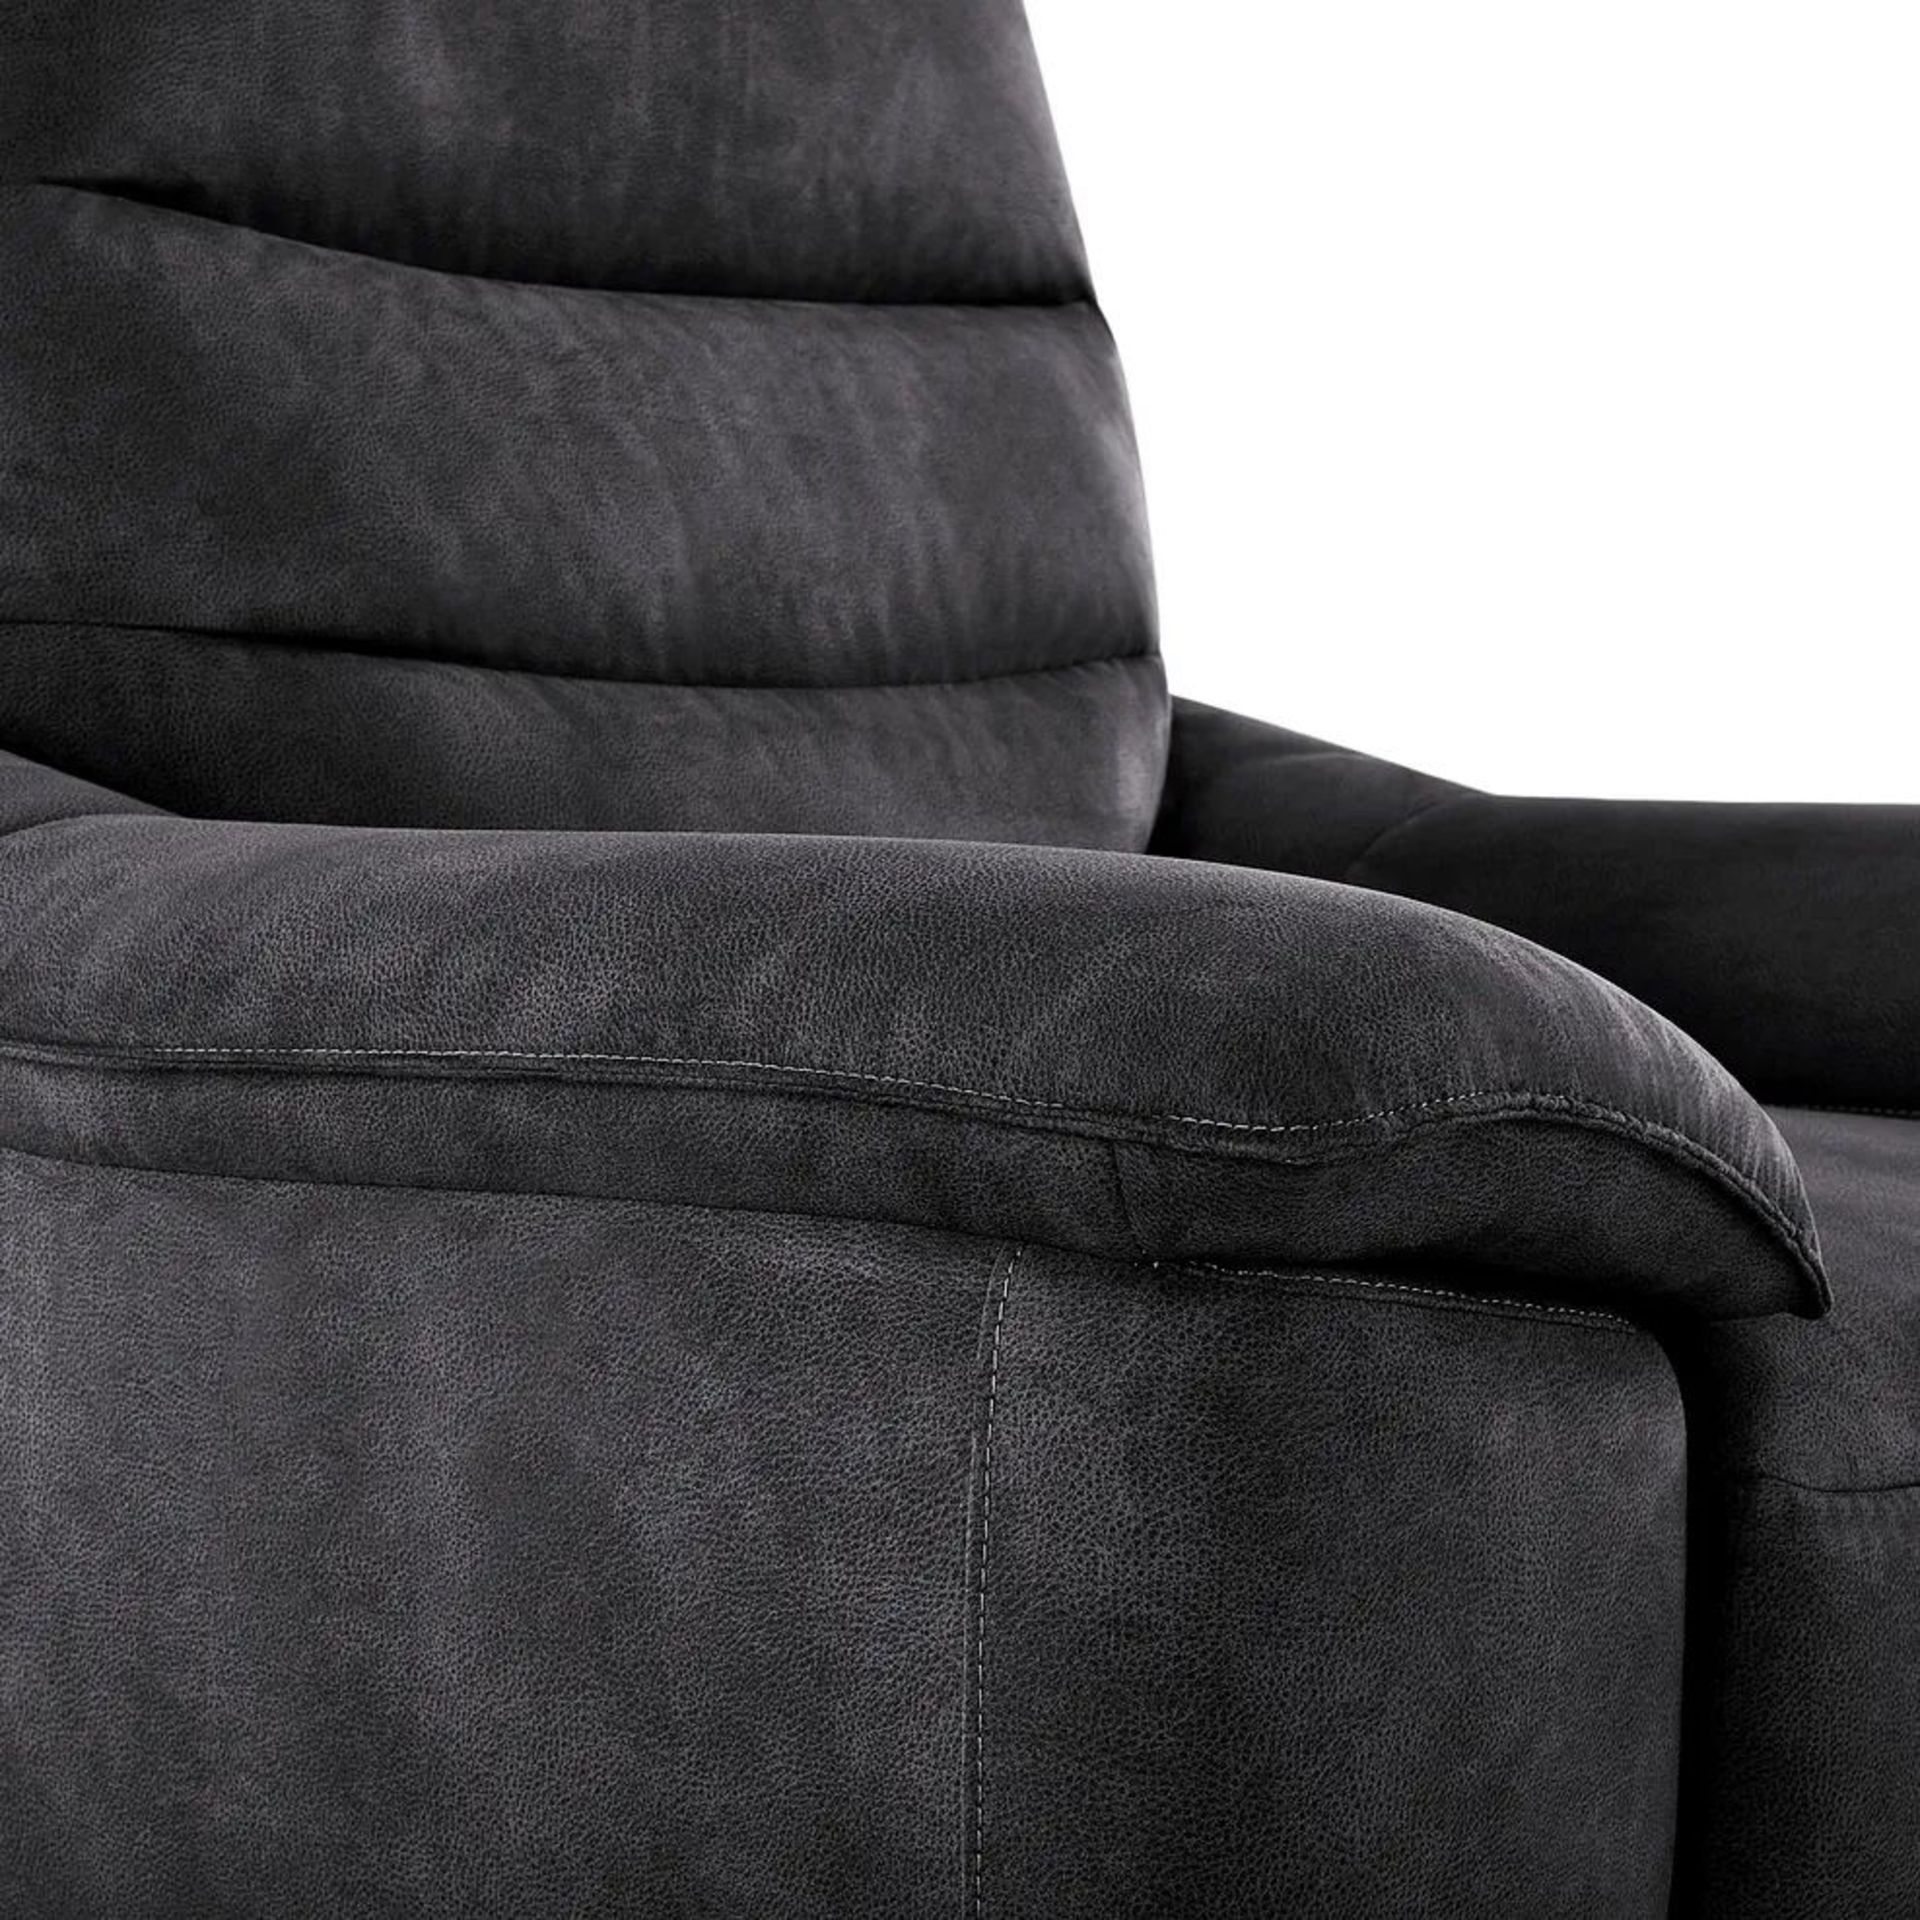 BRAND NEW CARTER Armchair - ANDAZ SILVER FABRIC. RRP £699. Shown here in Miller grey, our Carter - Image 7 of 9